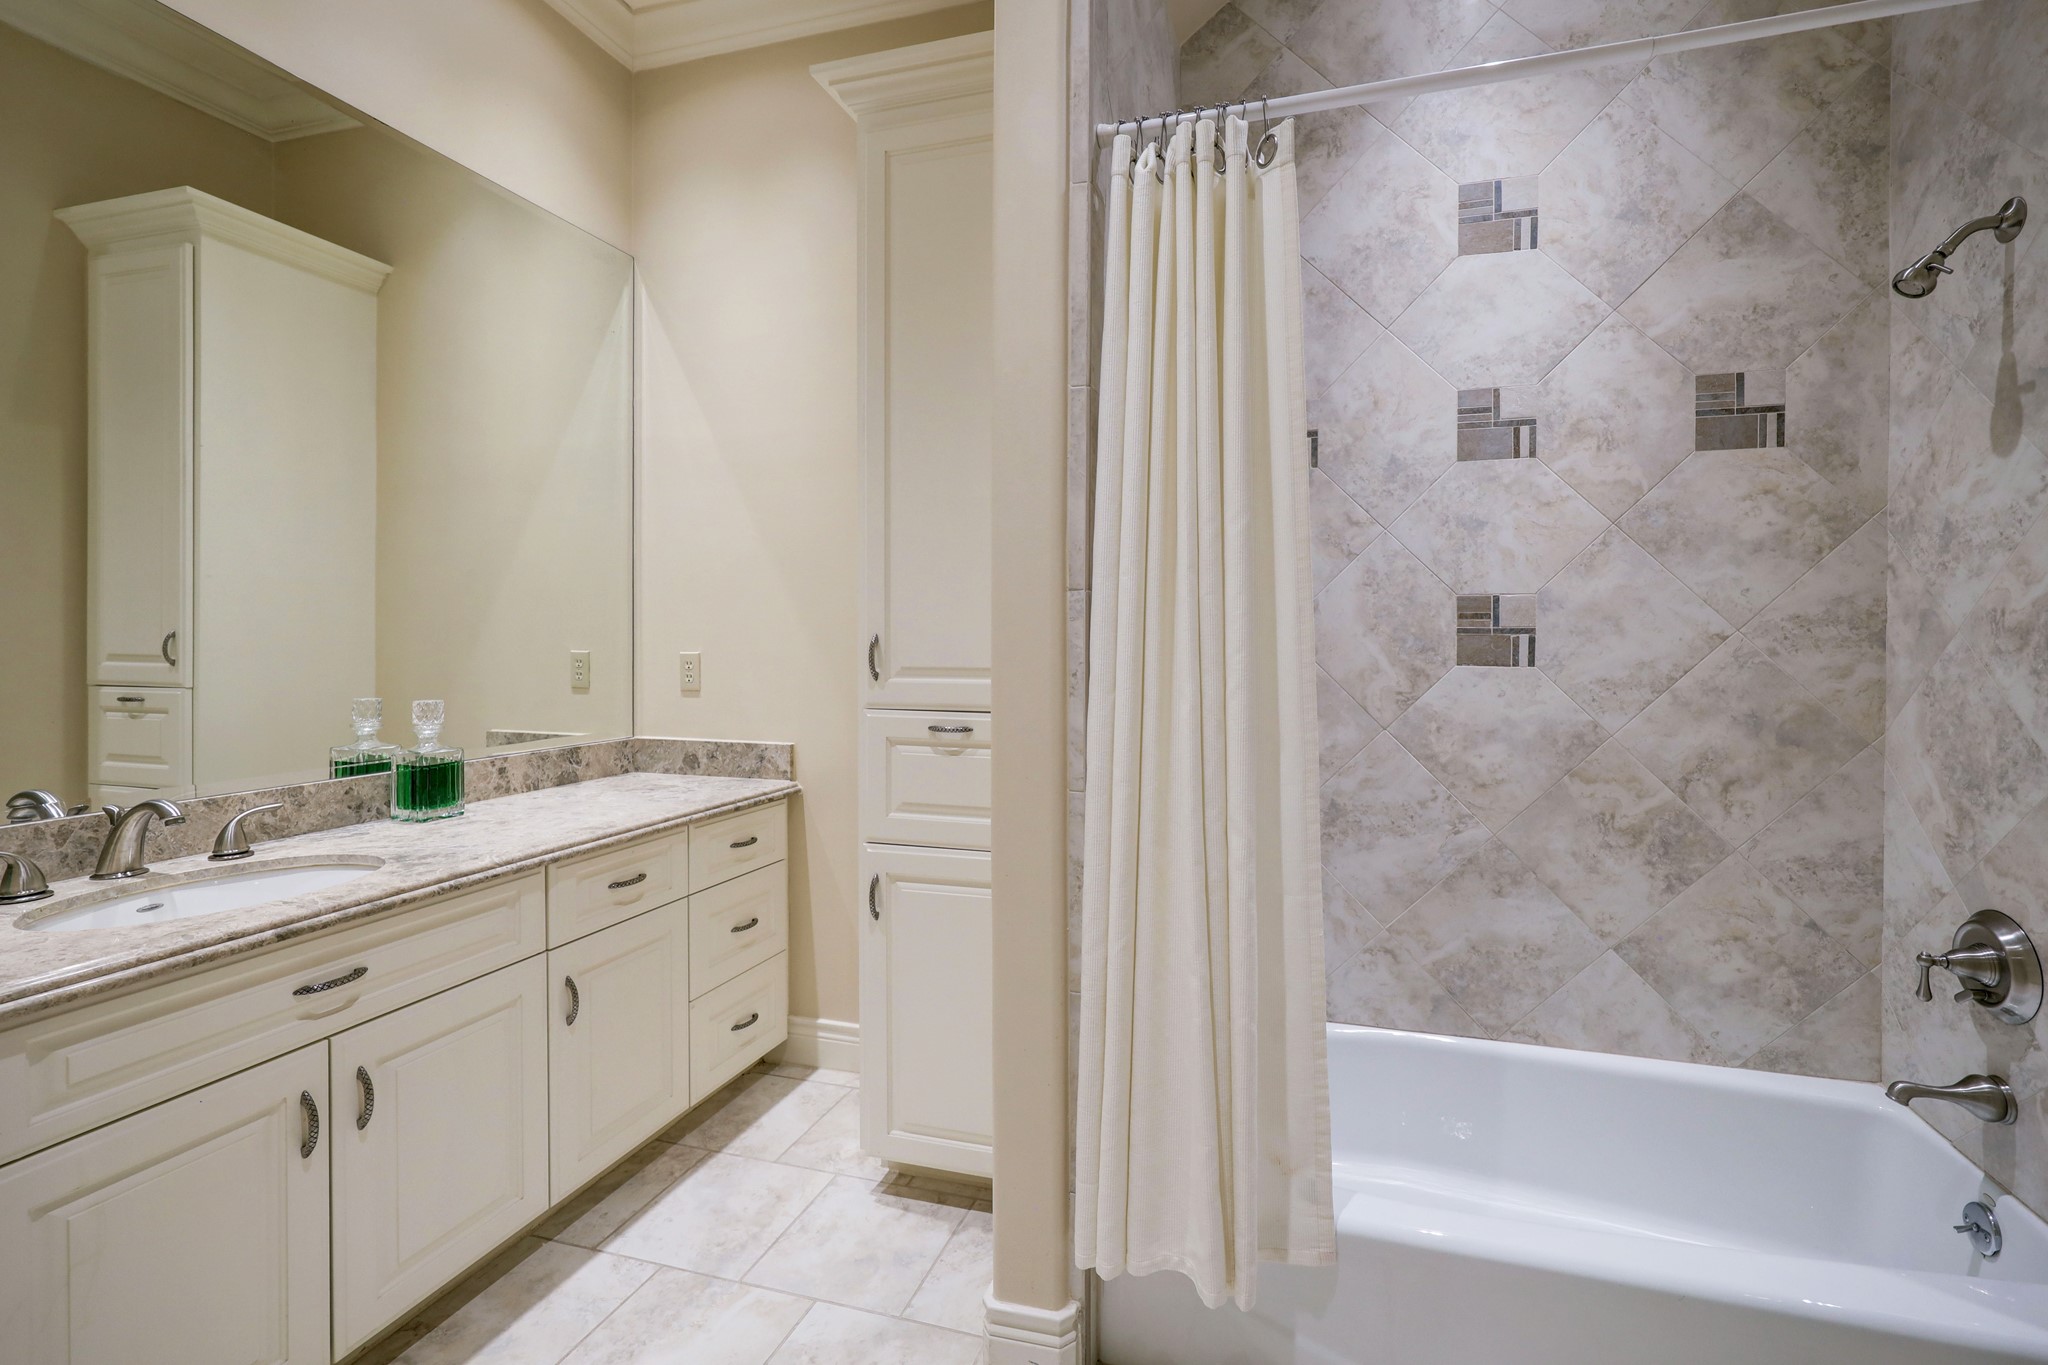 This Secondary Bathroom [13 x 6] features tile floors, marble countertop and backsplash, built-in linen storage and laundry hamper, and tub/shower combo with tile surround. This bathroom is meant to service the Home Theatre/Game Room.